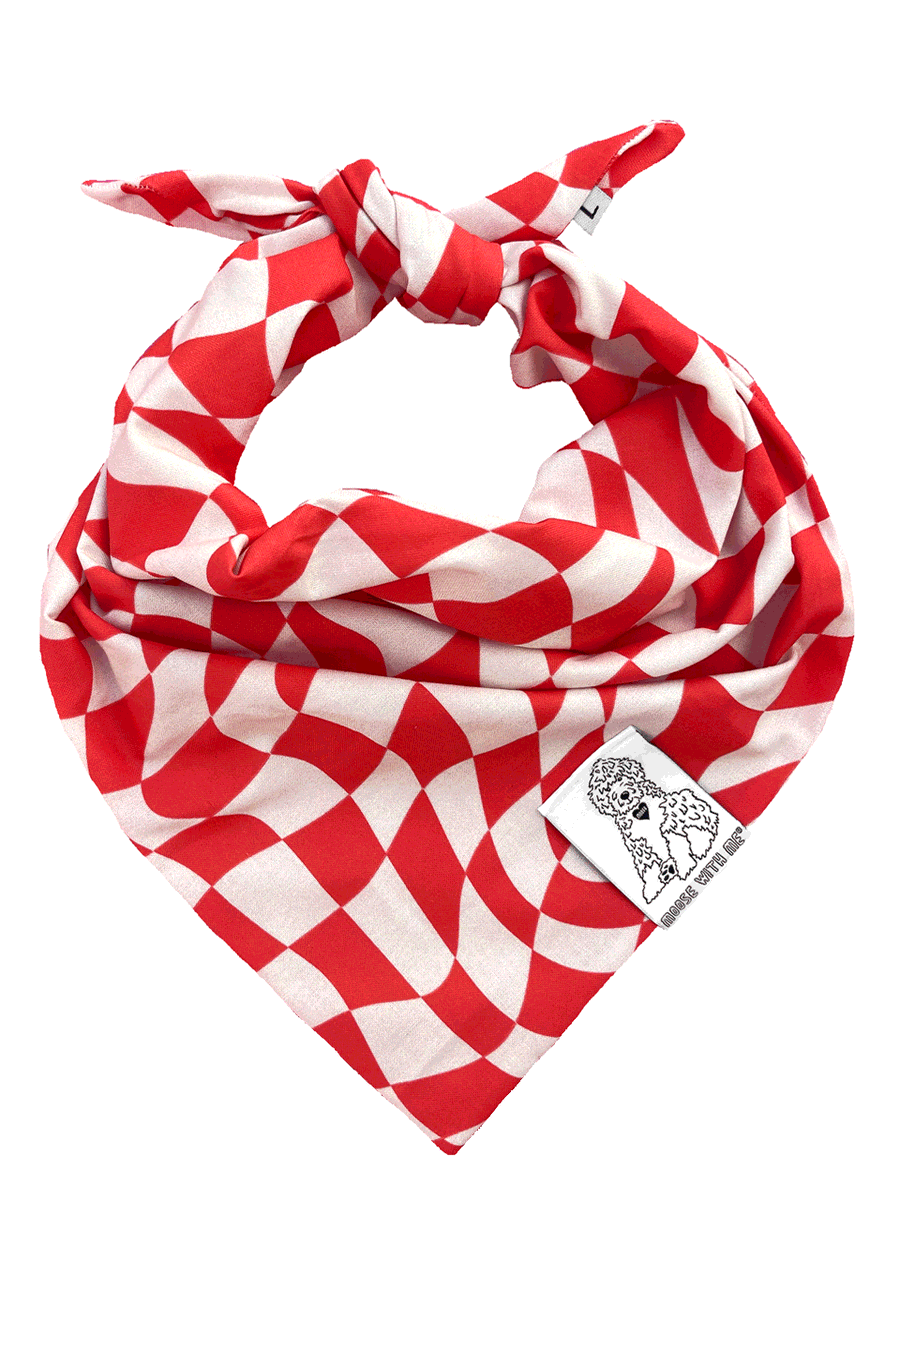 Dog Bandana Checkered Swirl - Customize with Interchangeable Velcro Patches